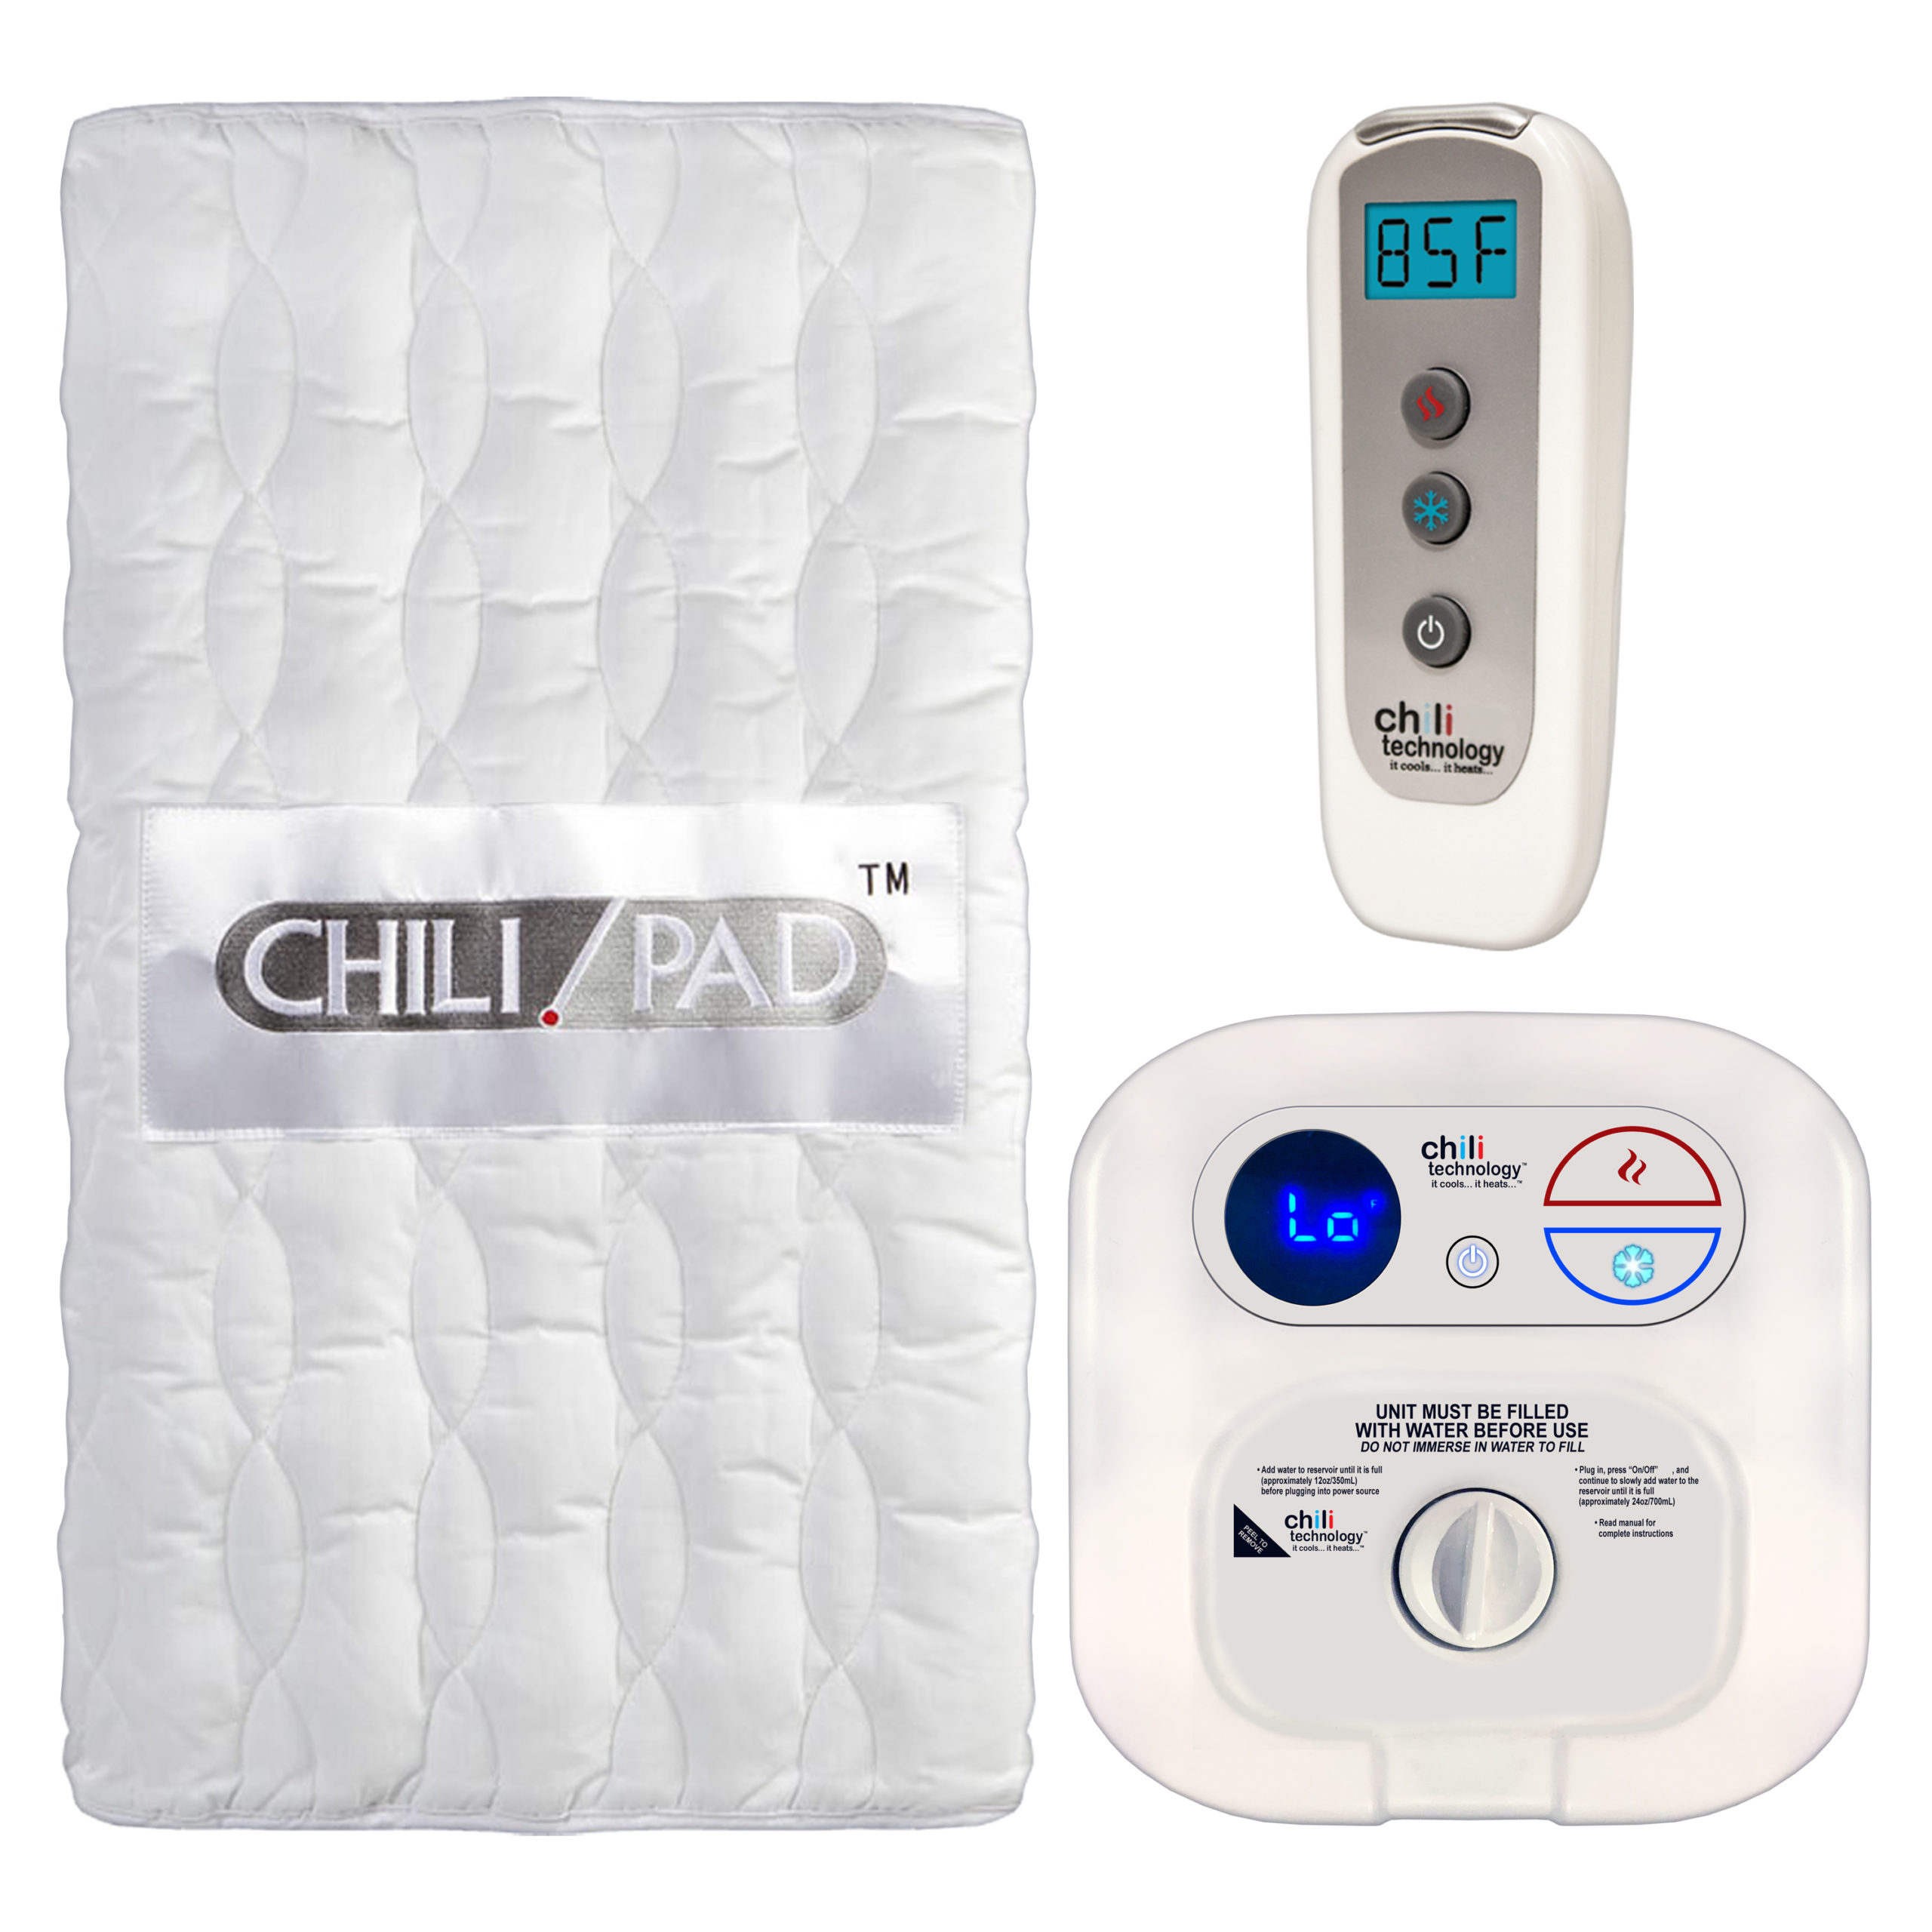 Weight Loss and Being Cold - Chilipad|Temperature|Mattress|Cube|Sleep|Bed|Water|System|Pad|Ooler|Control|Unit|Night|Bedjet|Technology|Side|Air|Product|Review|Body|Time|Degrees|Noise|Price|Pod|Tubes|Heat|Device|Cooling|Room|King|App|Features|Size|Cover|Sleepers|Sheets|Energy|Warranty|Quality|Mattress Pad|Control Unit|Cube Sleep System|Sleep Pod|Distilled Water|Remote Control|Sleep System|Desired Temperature|Water Tank|Chilipad Cube|Chili Technology|Deep Sleep|Pro Cover|Ooler Sleep System|Hydrogen Peroxide|Cool Mesh|Sleep Temperature|Fitted Sheet|Pod Pro|Sleep Quality|Smartphone App|Sleep Systems|Chilipad Sleep System|New Mattress|Sleep Trial|Full Refund|Mattress Topper|Body Heat|Air Flow|Chilipad Review